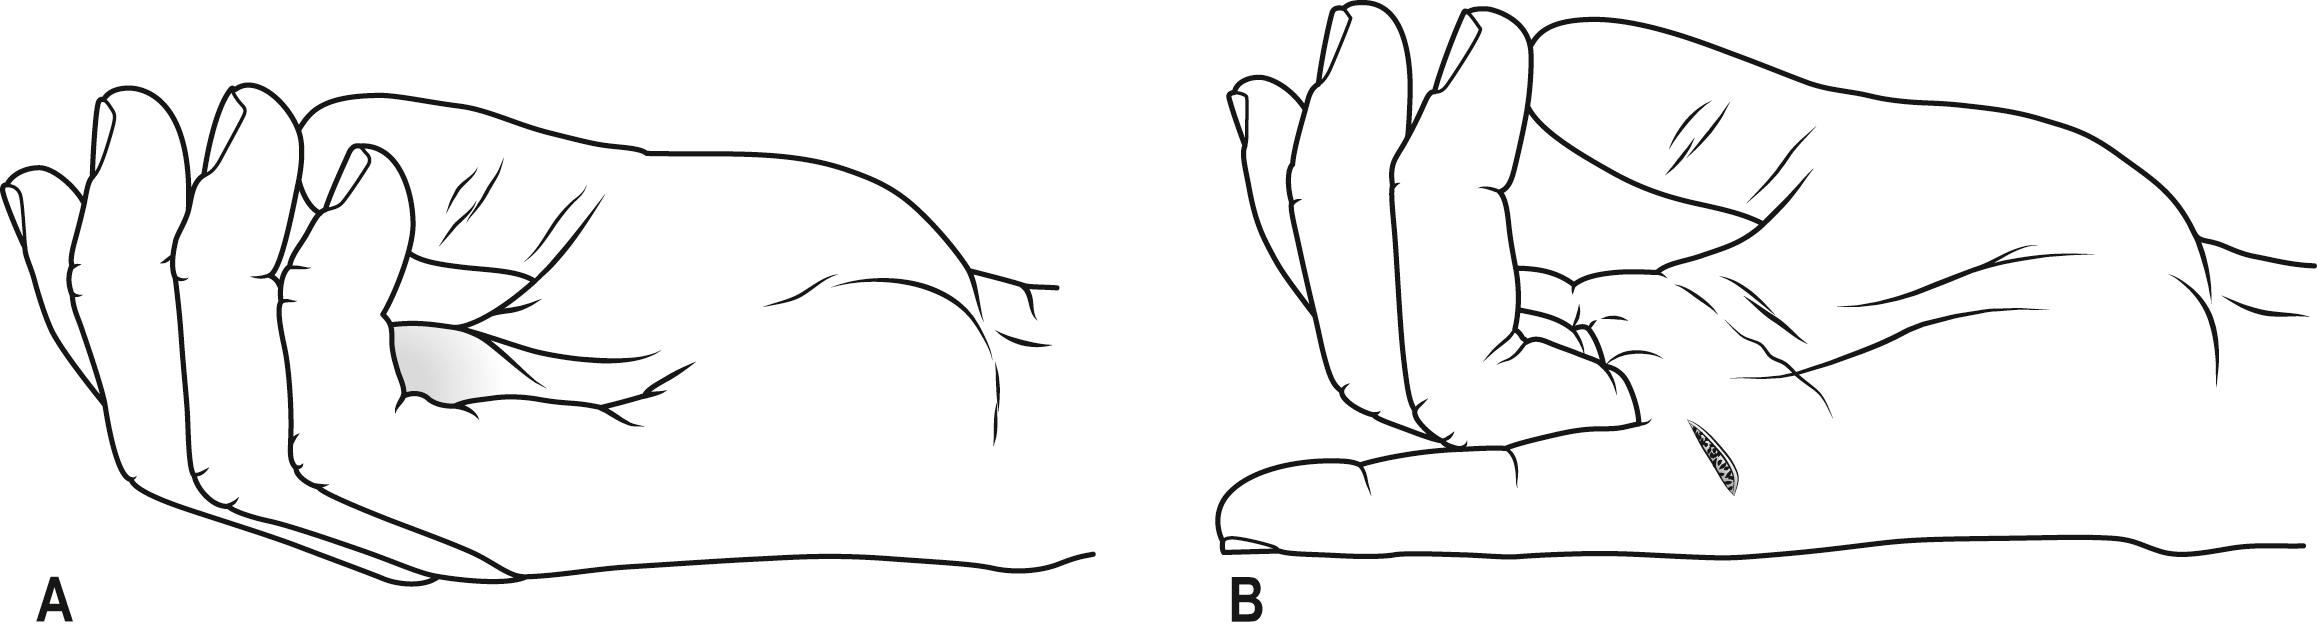 Fig. 4.5.2, (A) The normal resting hand. (B) The pointing finger.